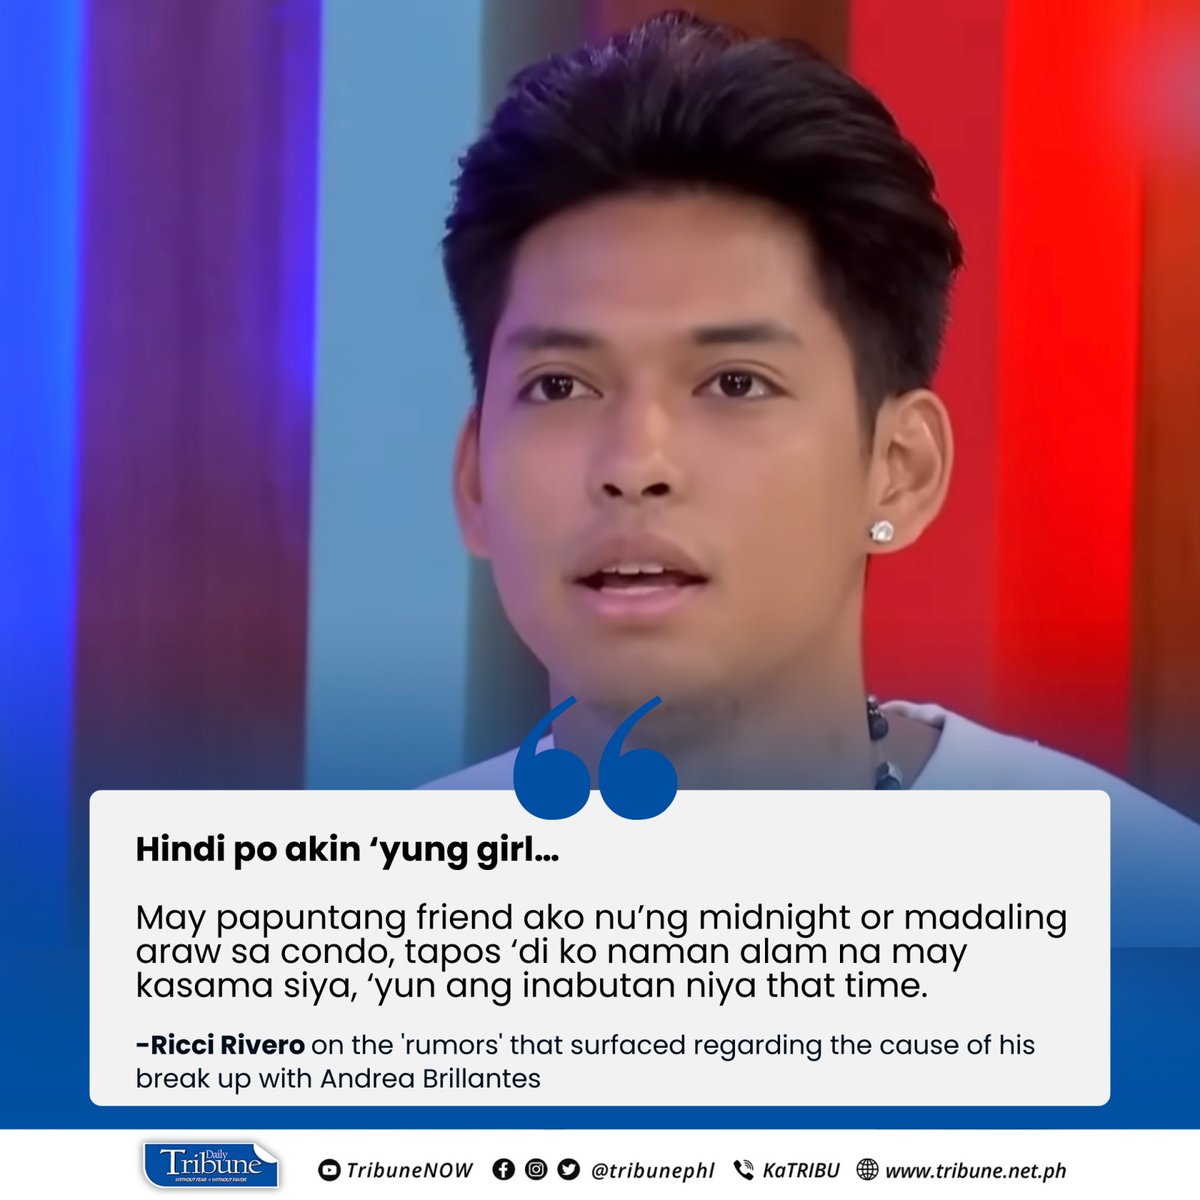 'HINDI PO AKIN 'YUNG GIRL'

Ricci Rivero aired his side of the story for the first time since the “rumors” regarding the reason for his recent breakup with actress Andrea Brillantes surfaced.

Read more at: tribune.net.ph/2023/06/26/ric…

#RicciRivero
#AndreaBrillantes
#ShowbizNews